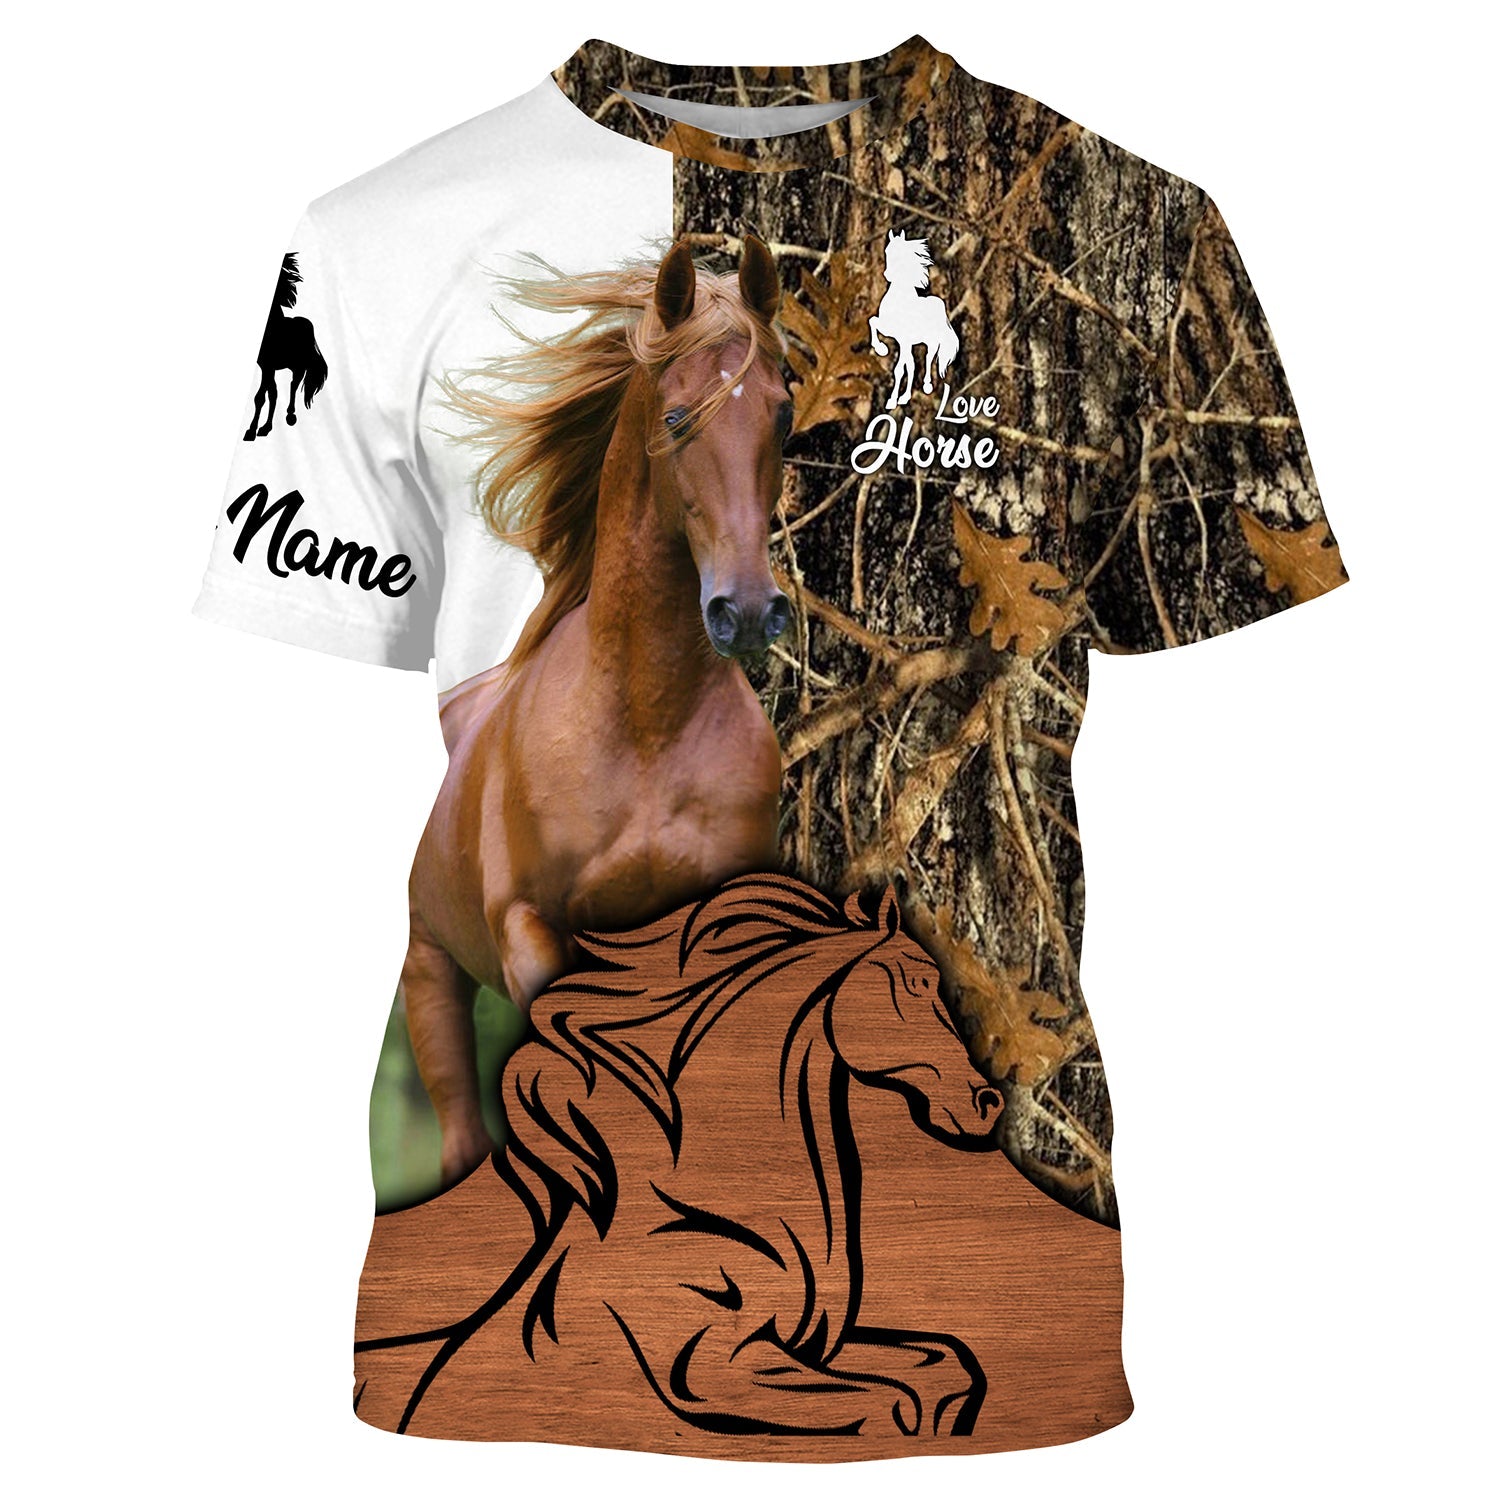 american-saddlebred-horse-saddlebred-clothing-camo-customize-name-3d-all-over-printed-shirts-personalized-gift-for-horse-lovers-fishing-t-shirt